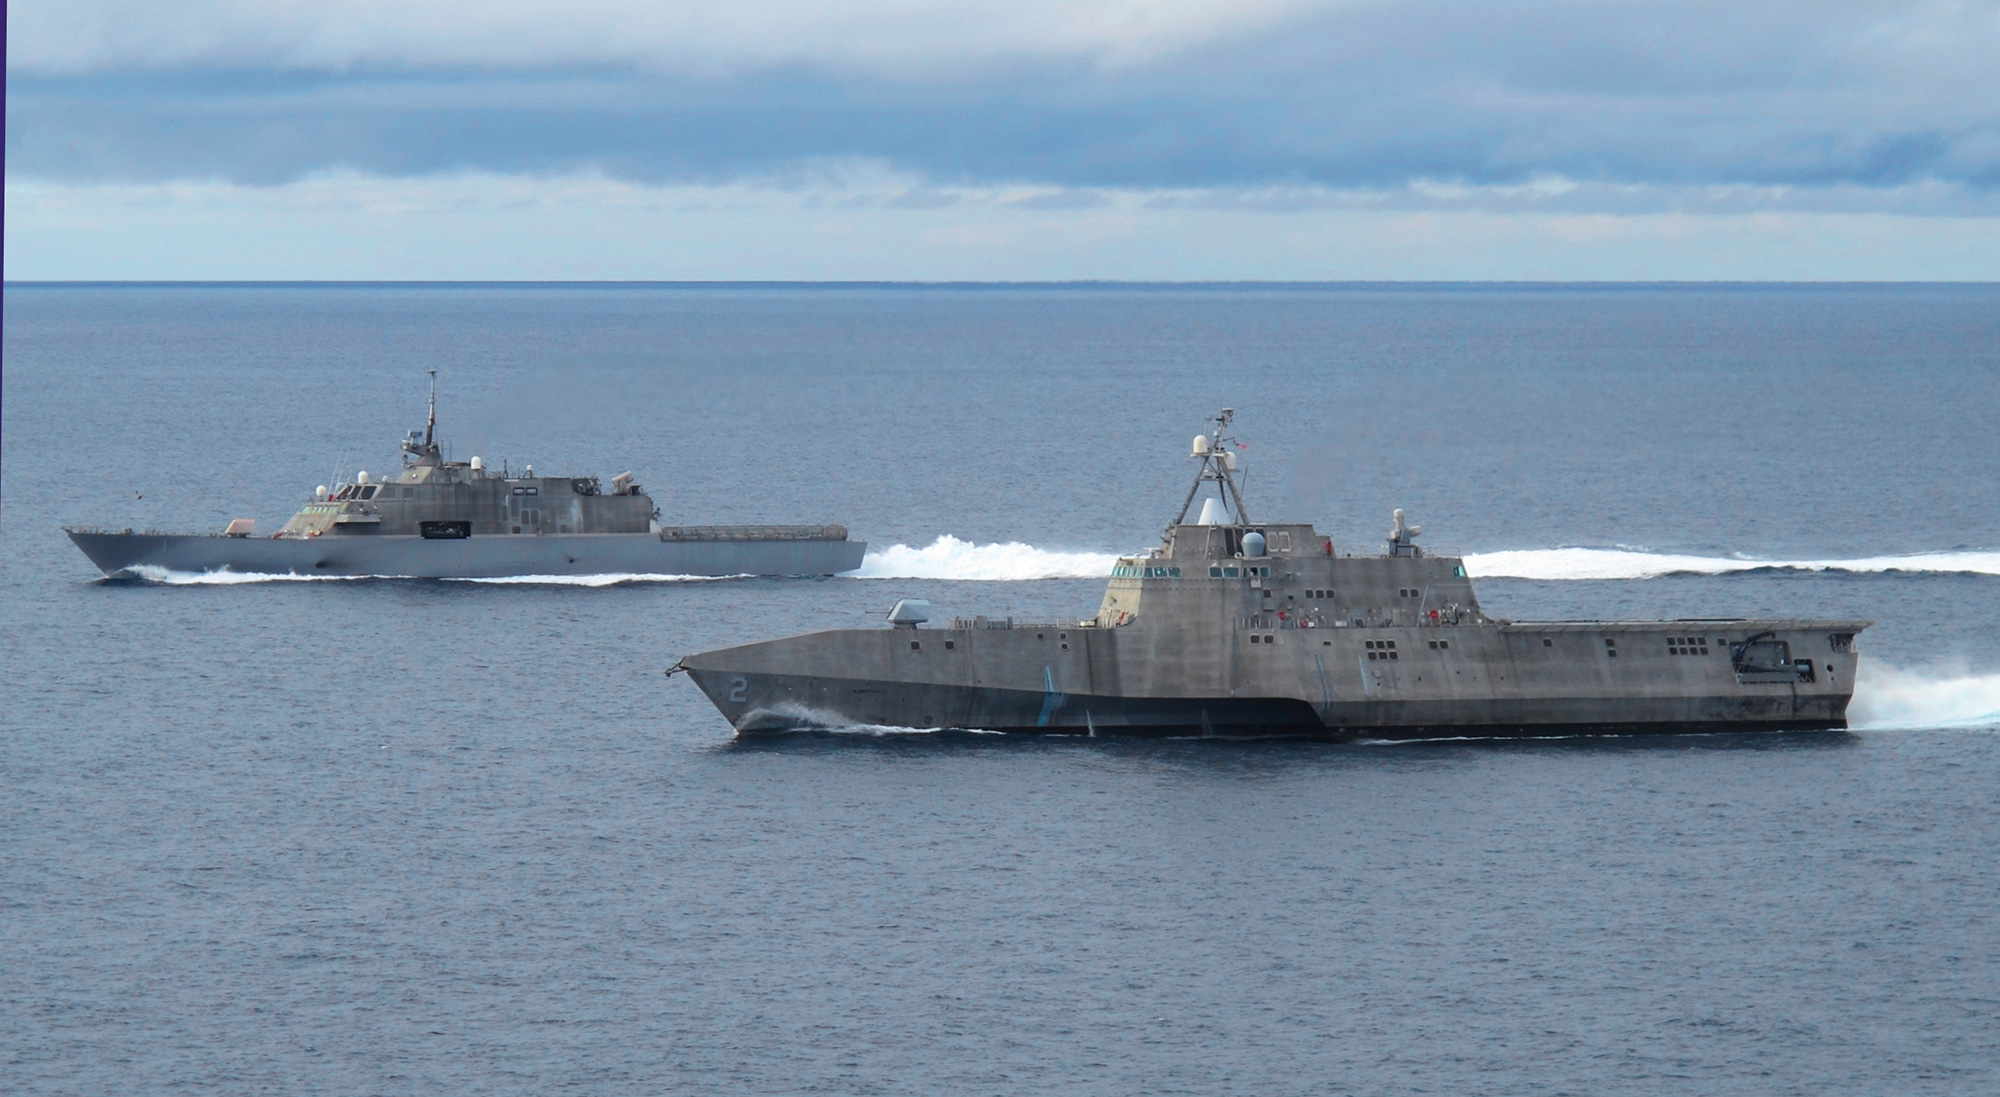 Littoral combat ships USS Freedom (LCS 1) and USS Independence (LCS 2)